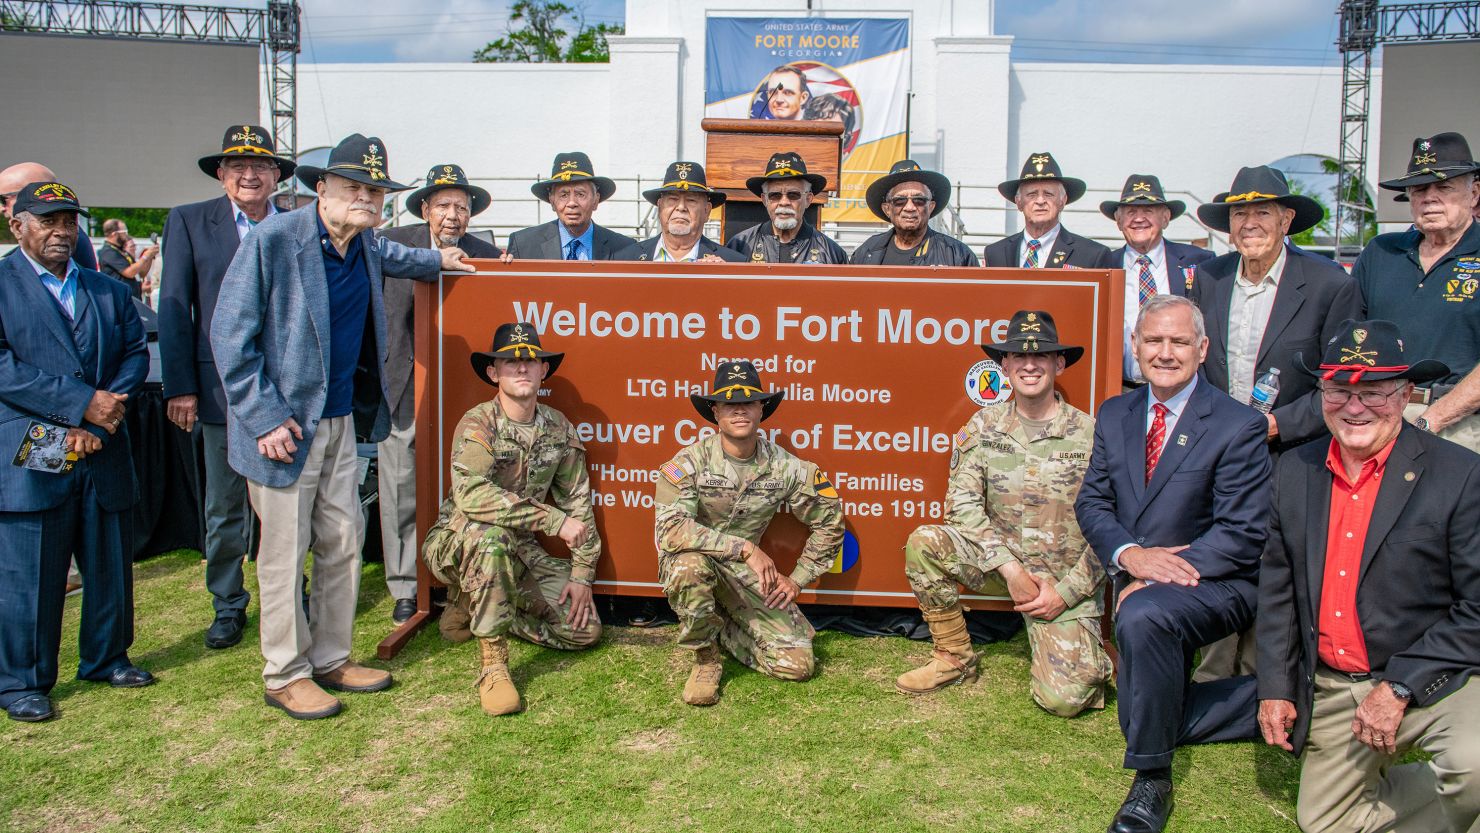 Fort Benning near Columbus, Georgia, was renamed Fort Moore on Thursday to honor the late Lt. Gen. Harold "Hal" Moore and his wife Julia.